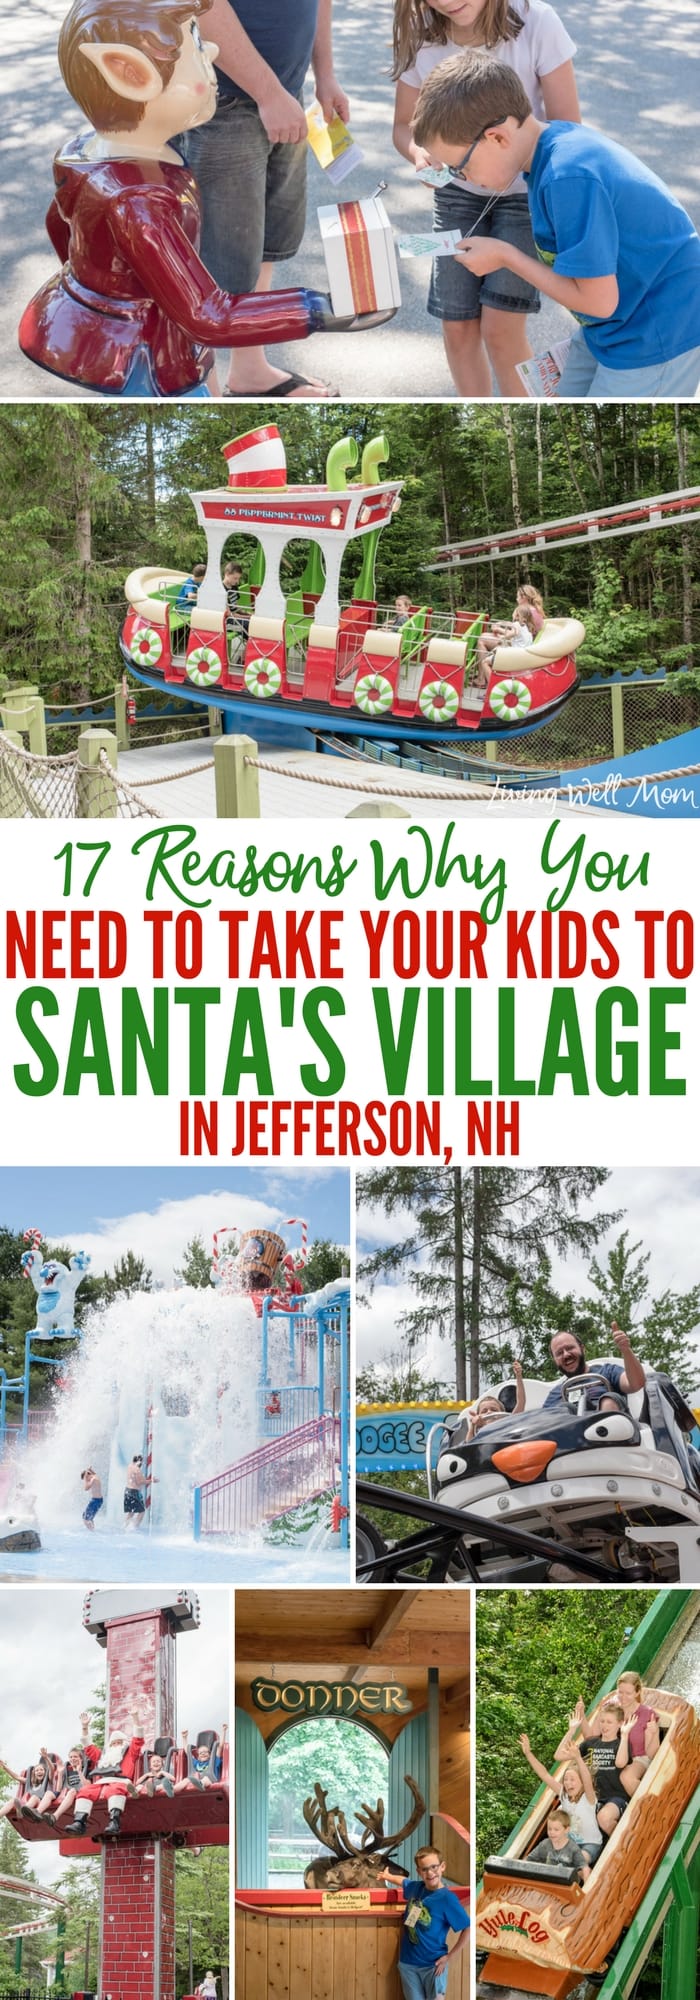 17 Reasons Why You Need to Take Your Family to Santa's Village in Jefferson, NH - from meeting Santa himself to feeding his reindeer, fun roller coasters and an awesome watermark, Santa's Village is an amazing family attraction the whole family will love!